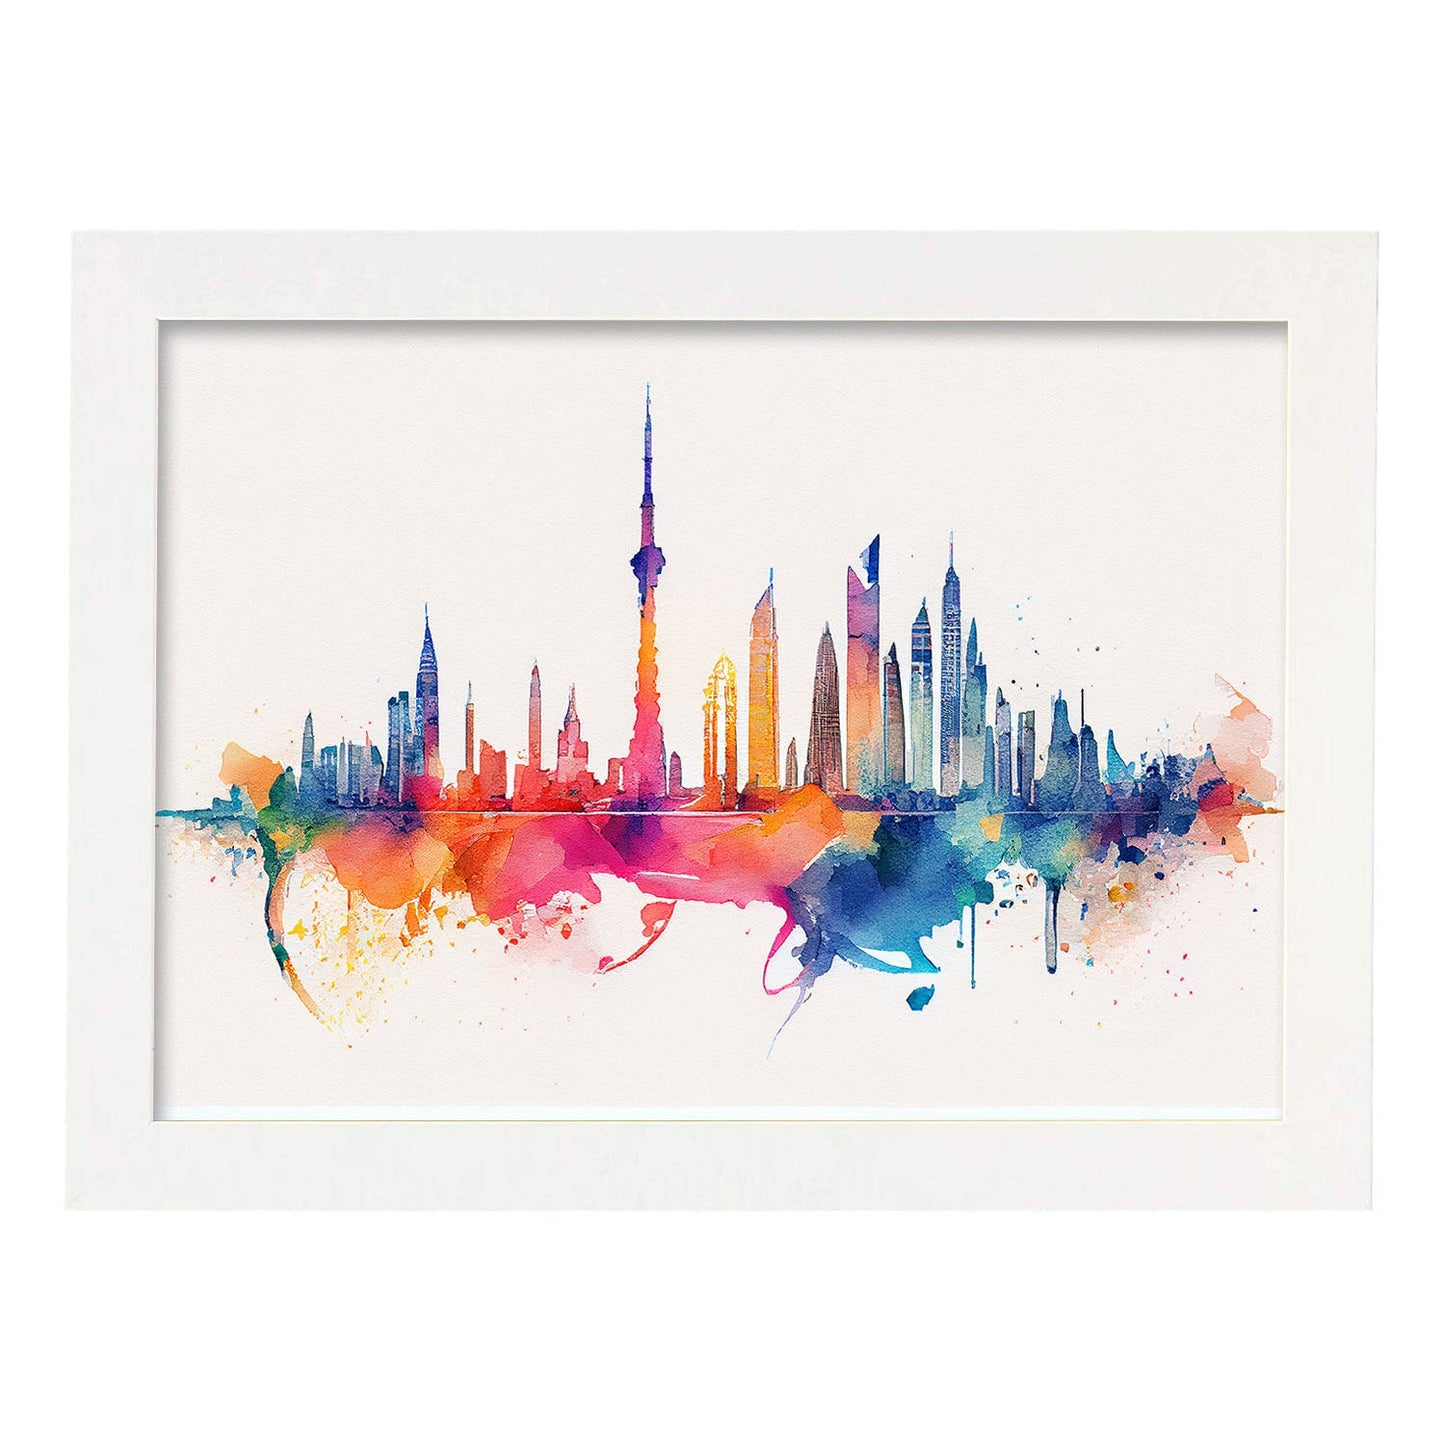 Nacnic watercolor of a skyline of the city of Dubai. Aesthetic Wall Art Prints for Bedroom or Living Room Design.-Artwork-Nacnic-A4-Marco Blanco-Nacnic Estudio SL